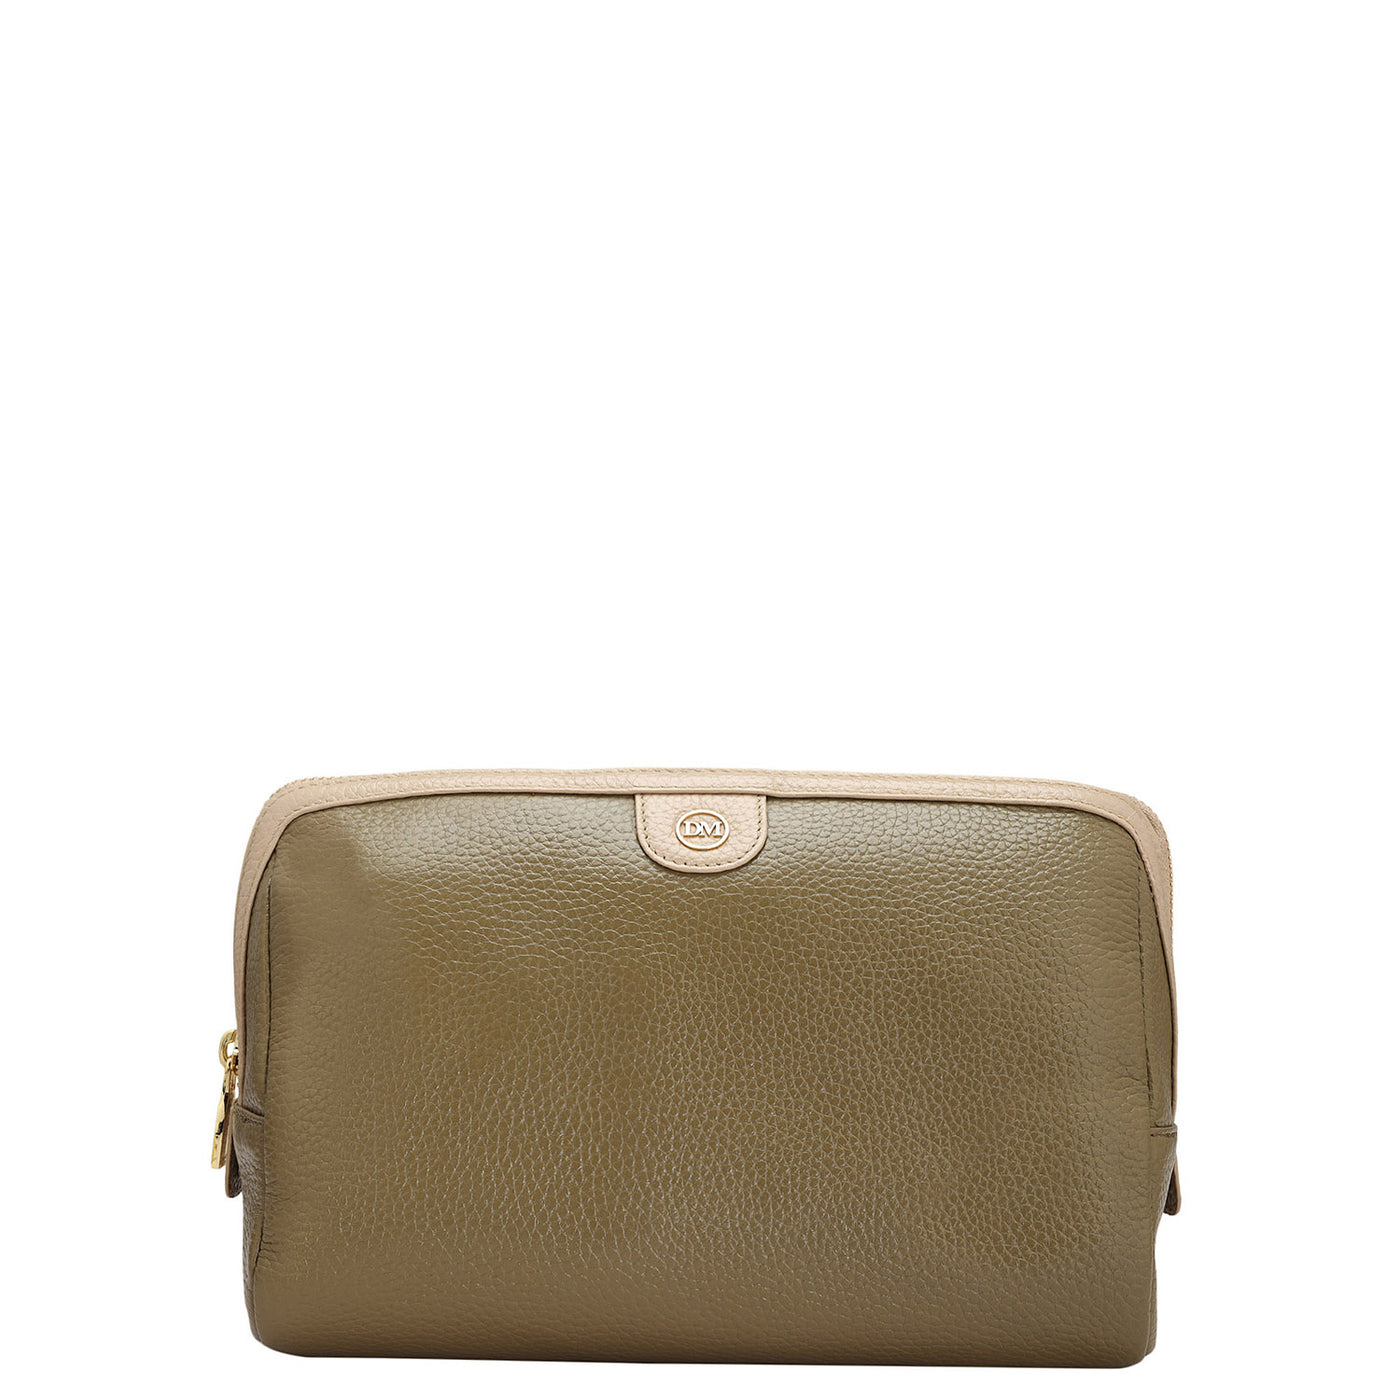 Wax Leather Vanity Pouch - Olive